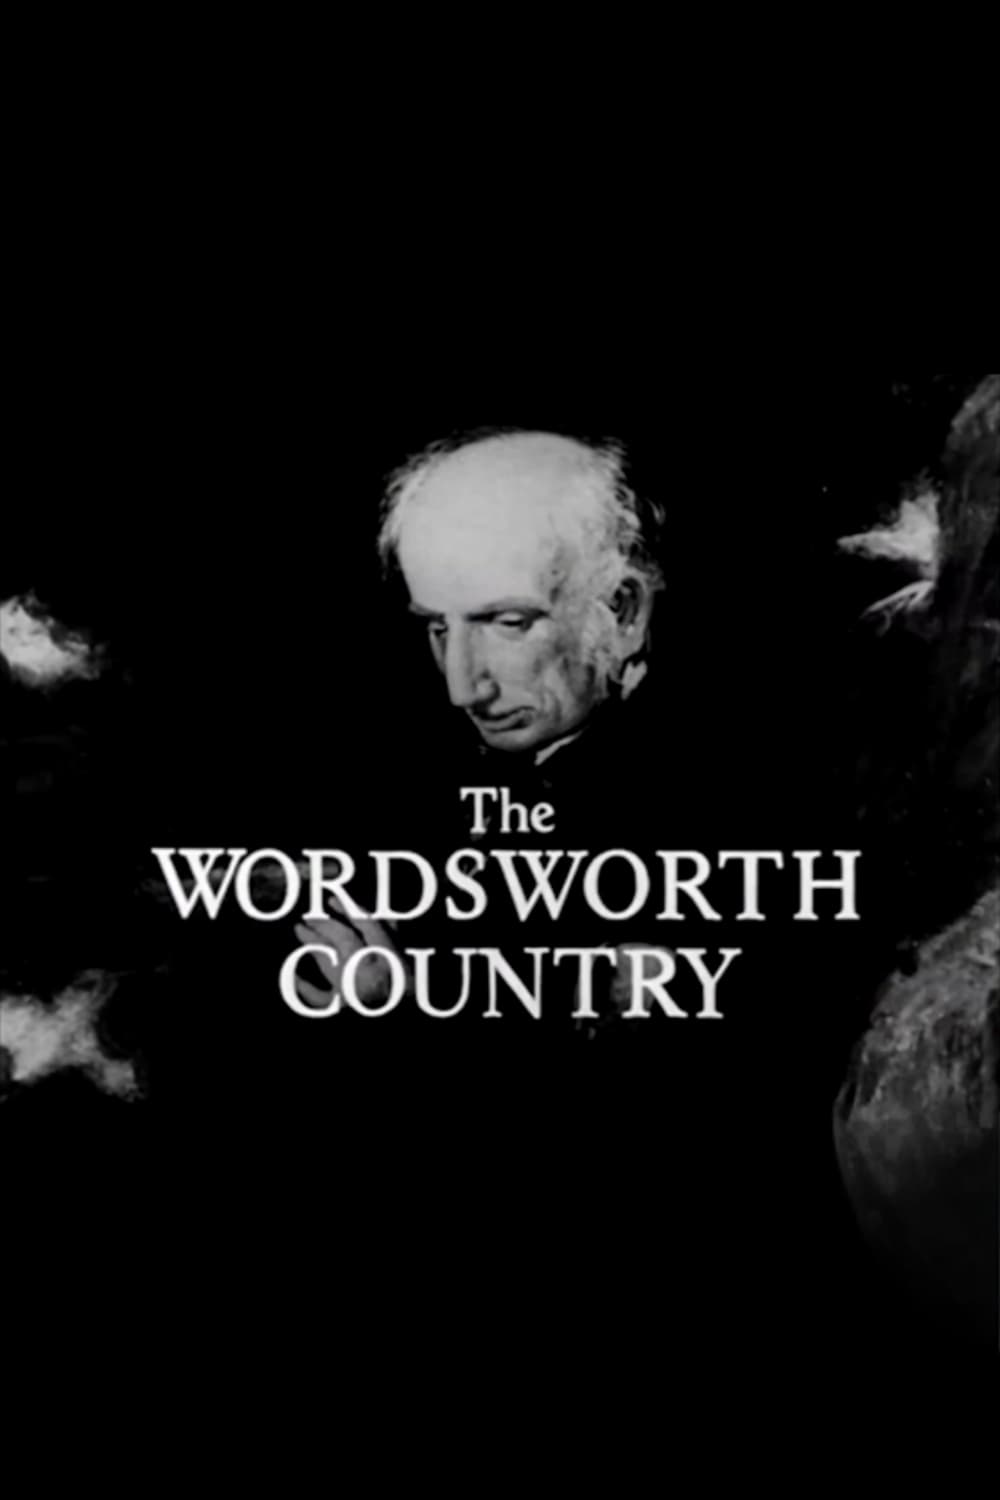 Wordsworth Country